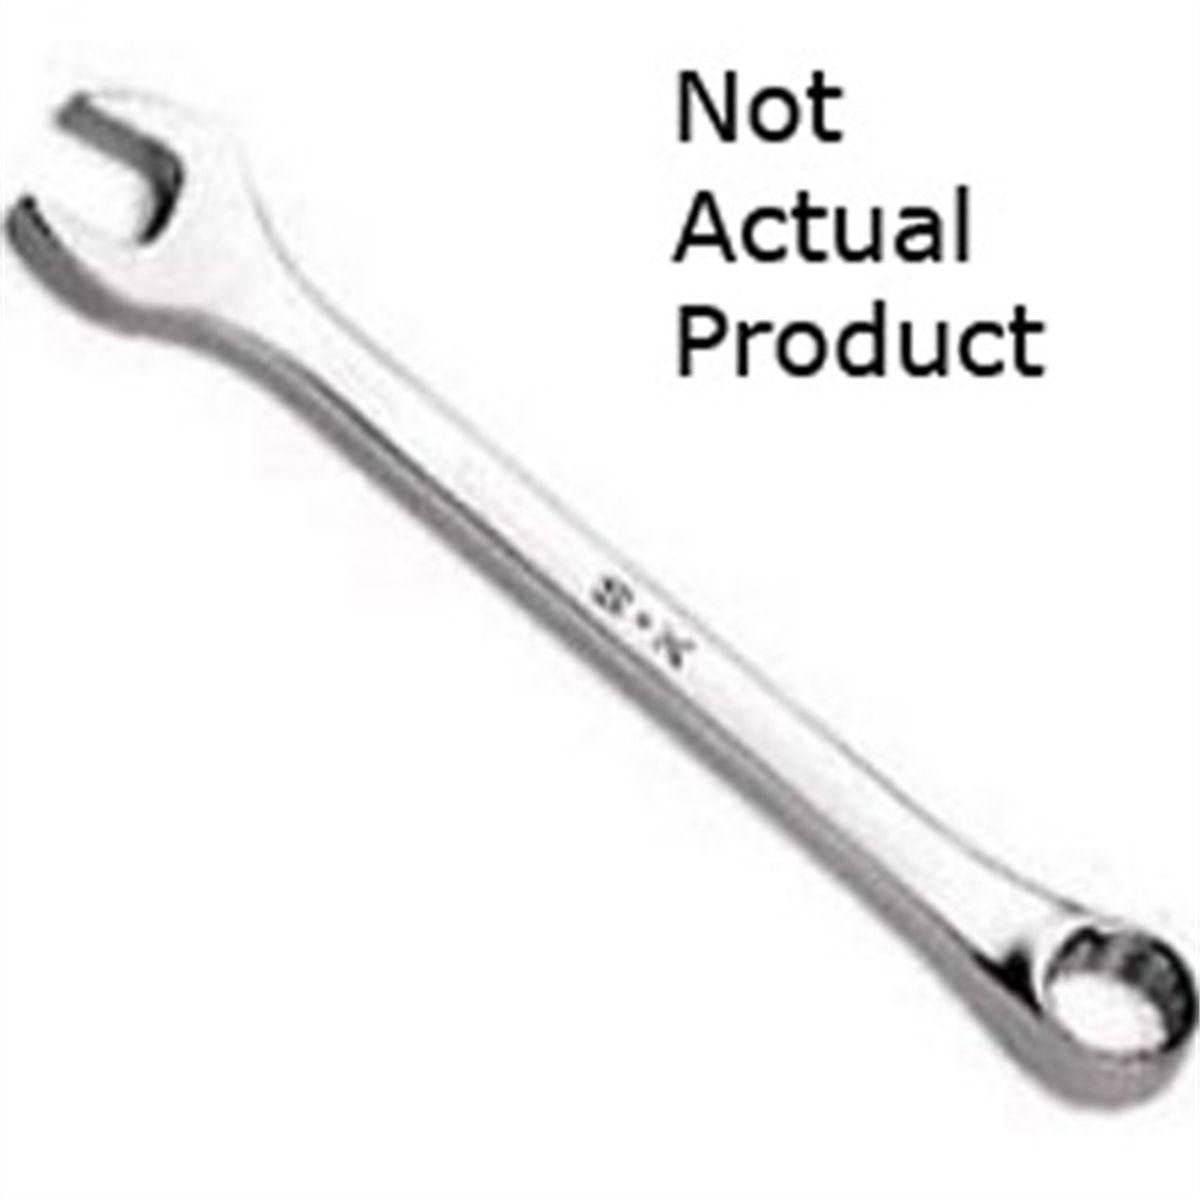 12 Point SuperKrome(R) Fractional Combination Wrench - 9/32"